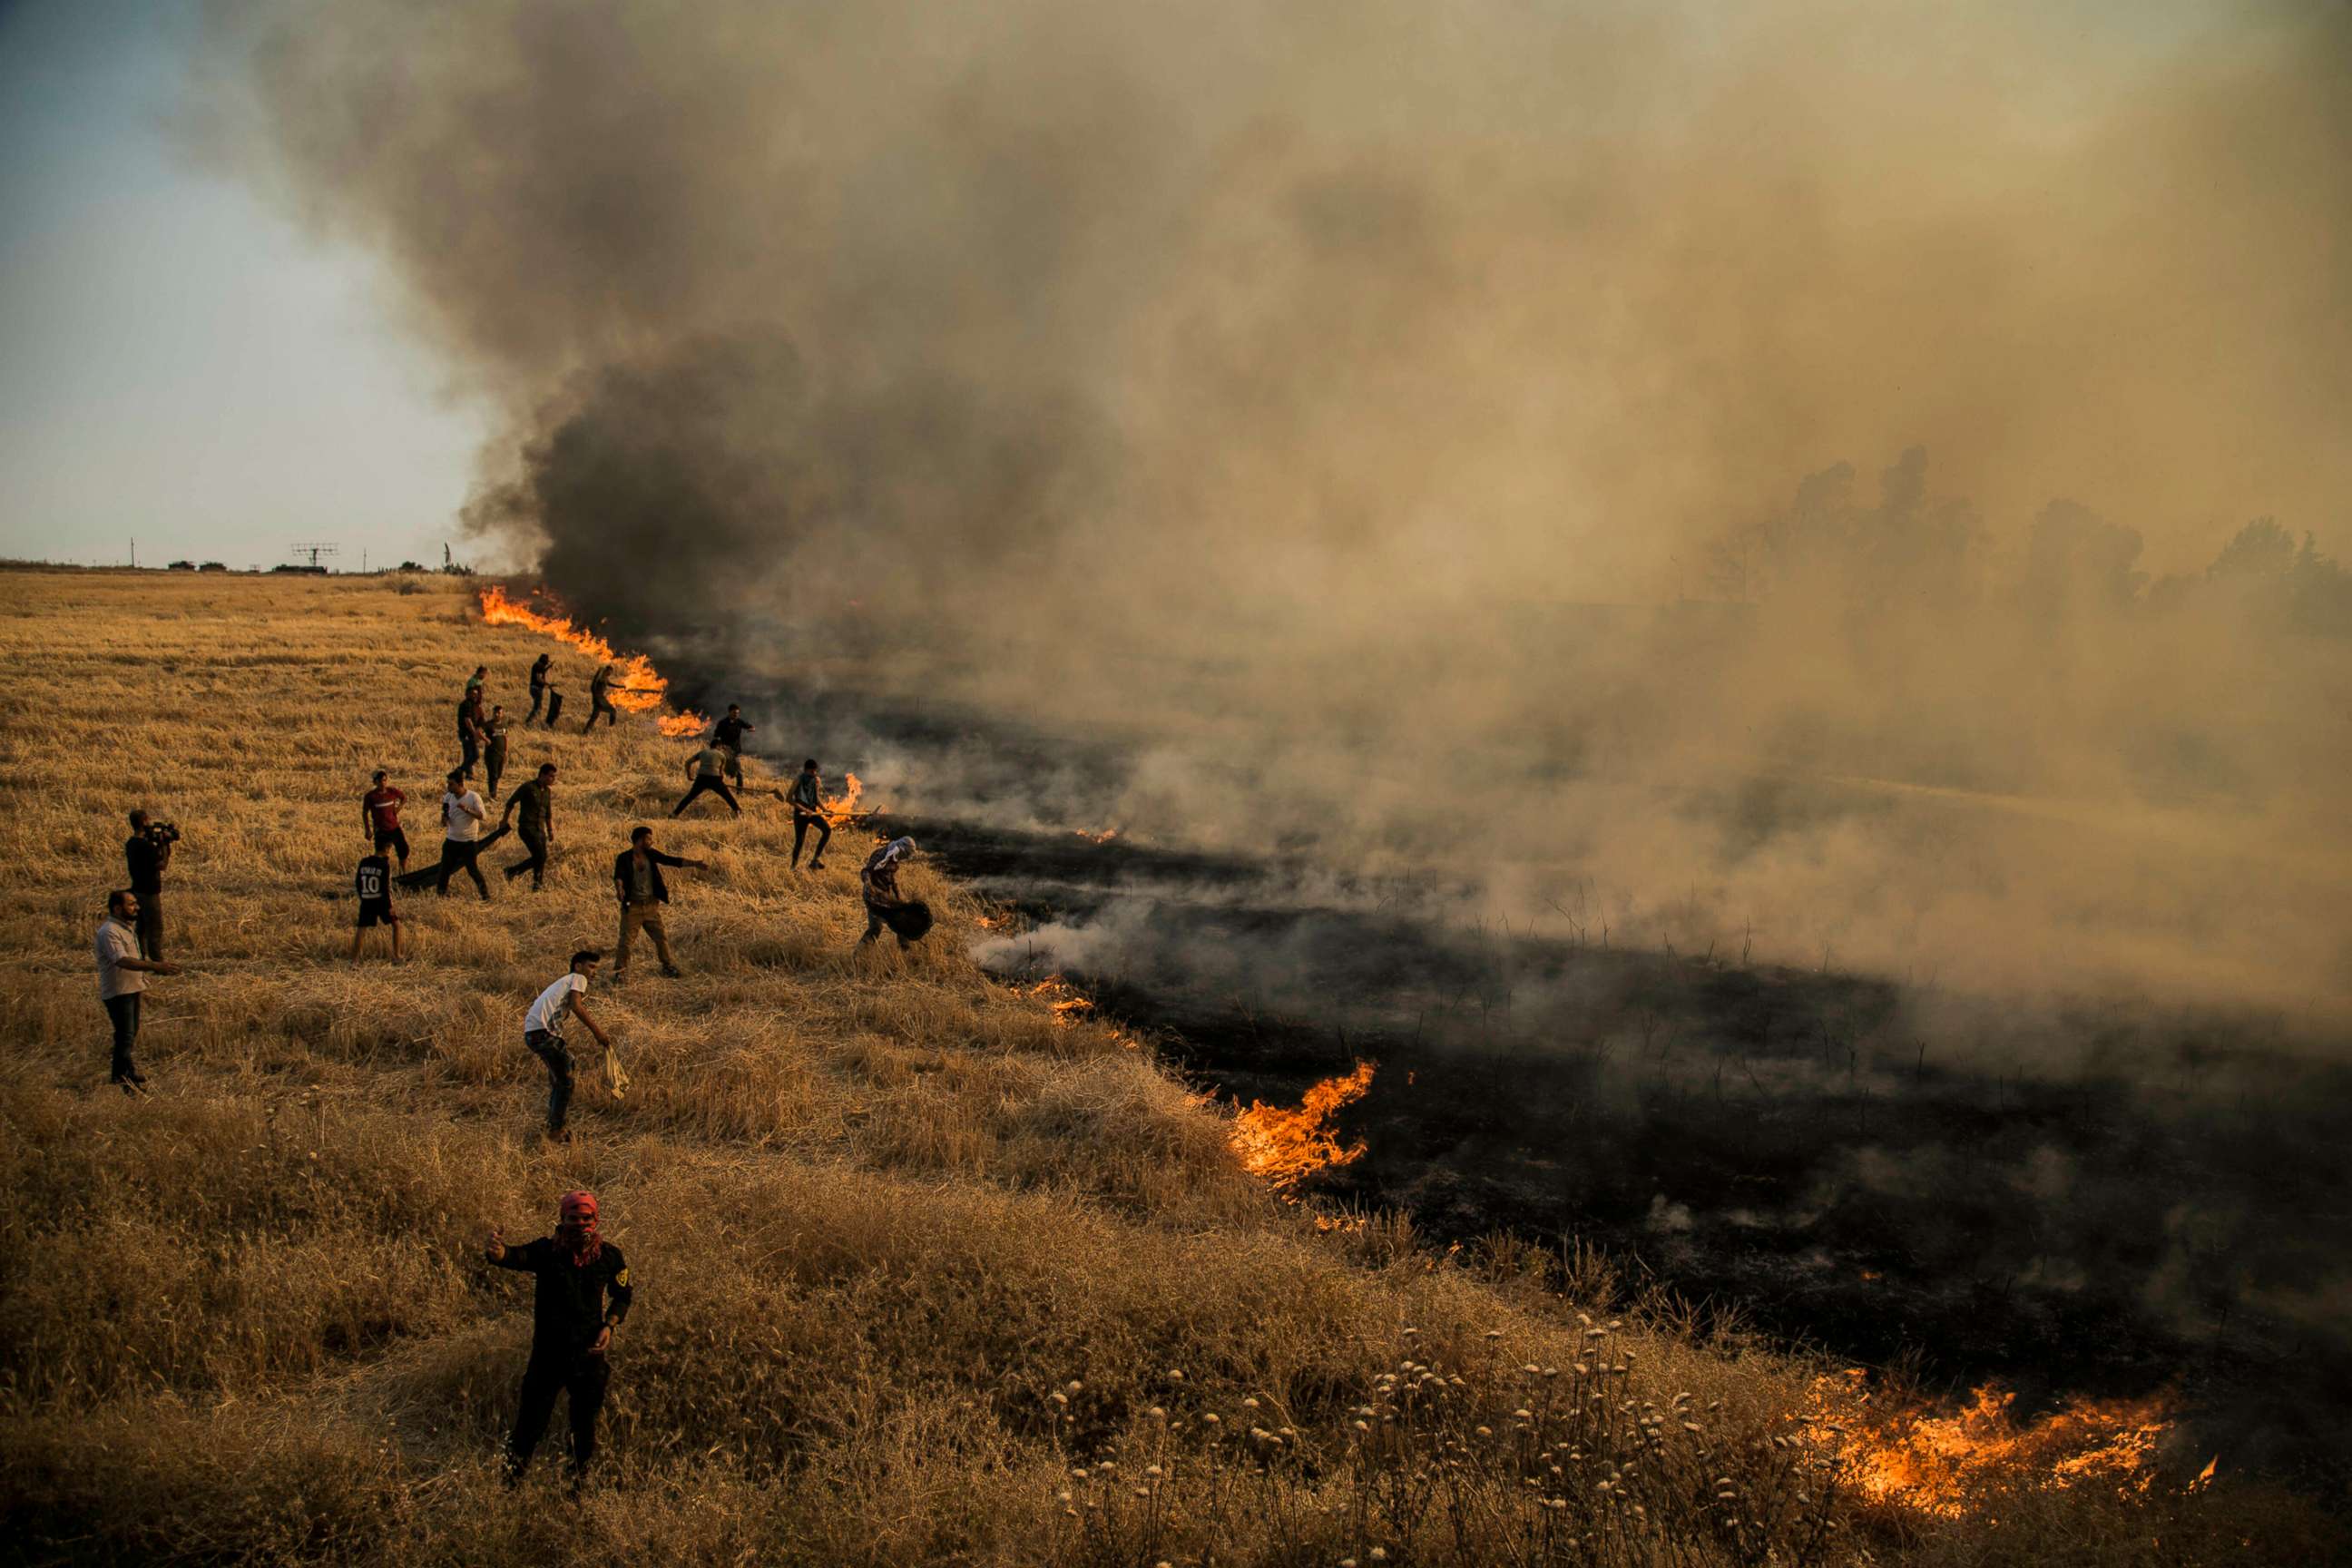 PHOTO: In this June 17, 2019, file photo, people fight the fire in the farmlands surrounding the town of Qamishli in northeastern Syria.